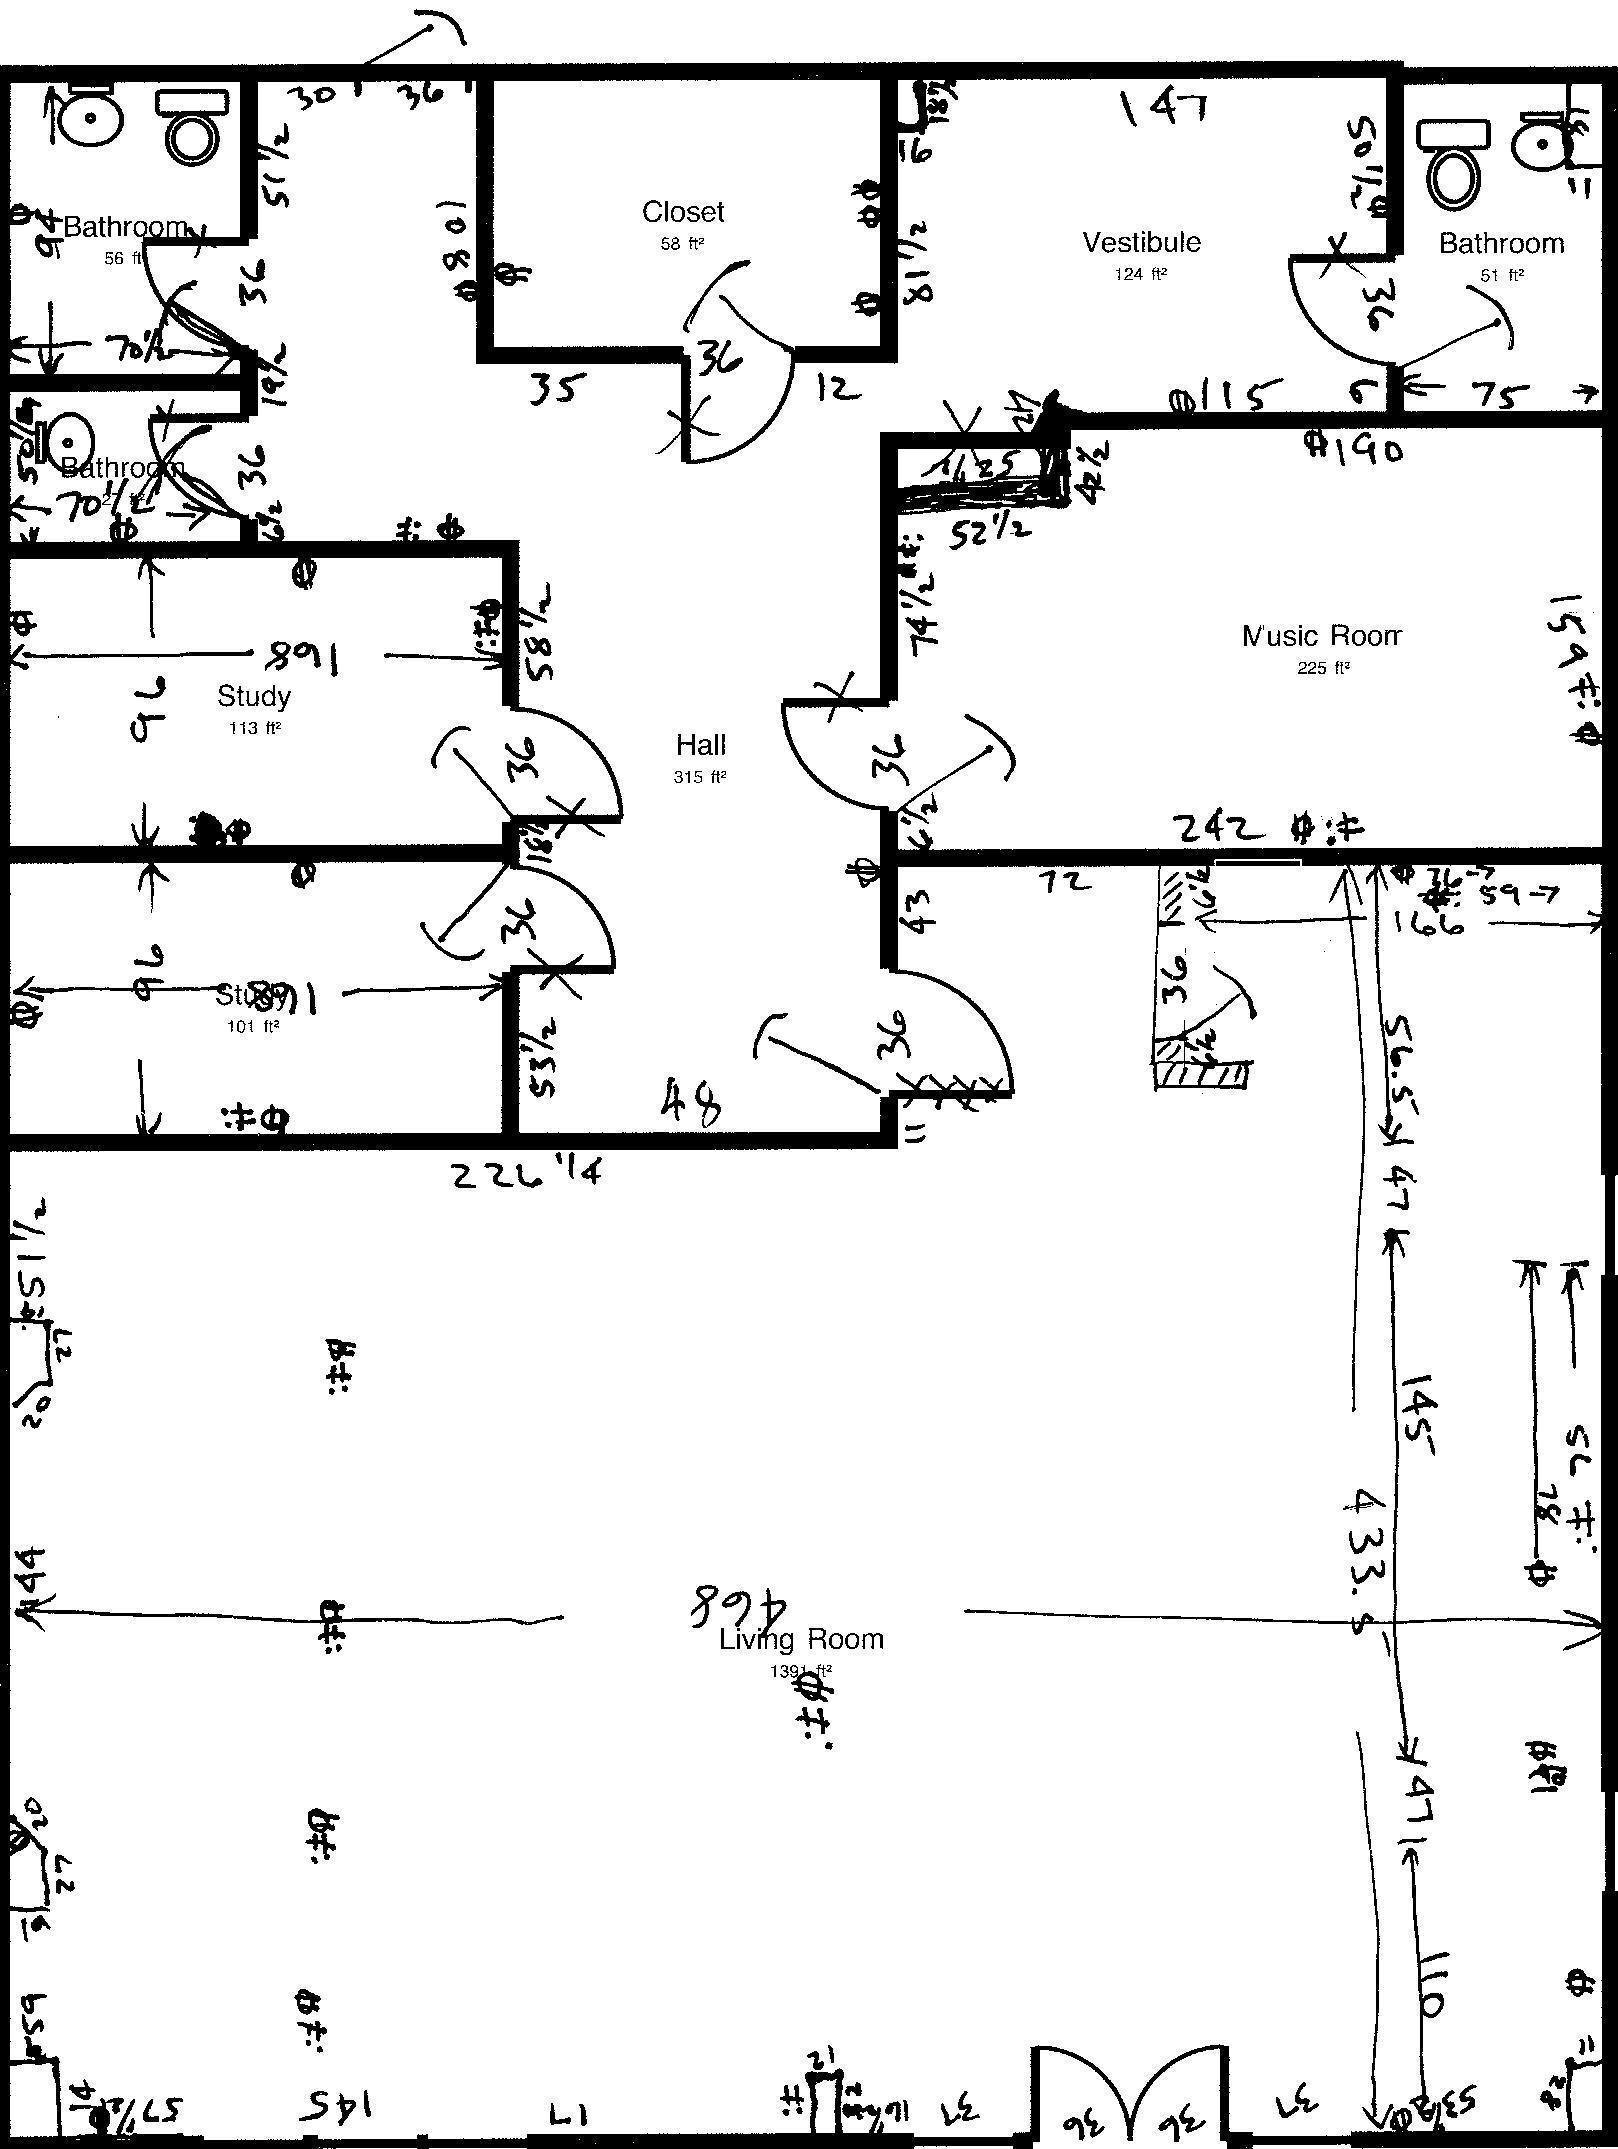 Floorplan with dimmensions